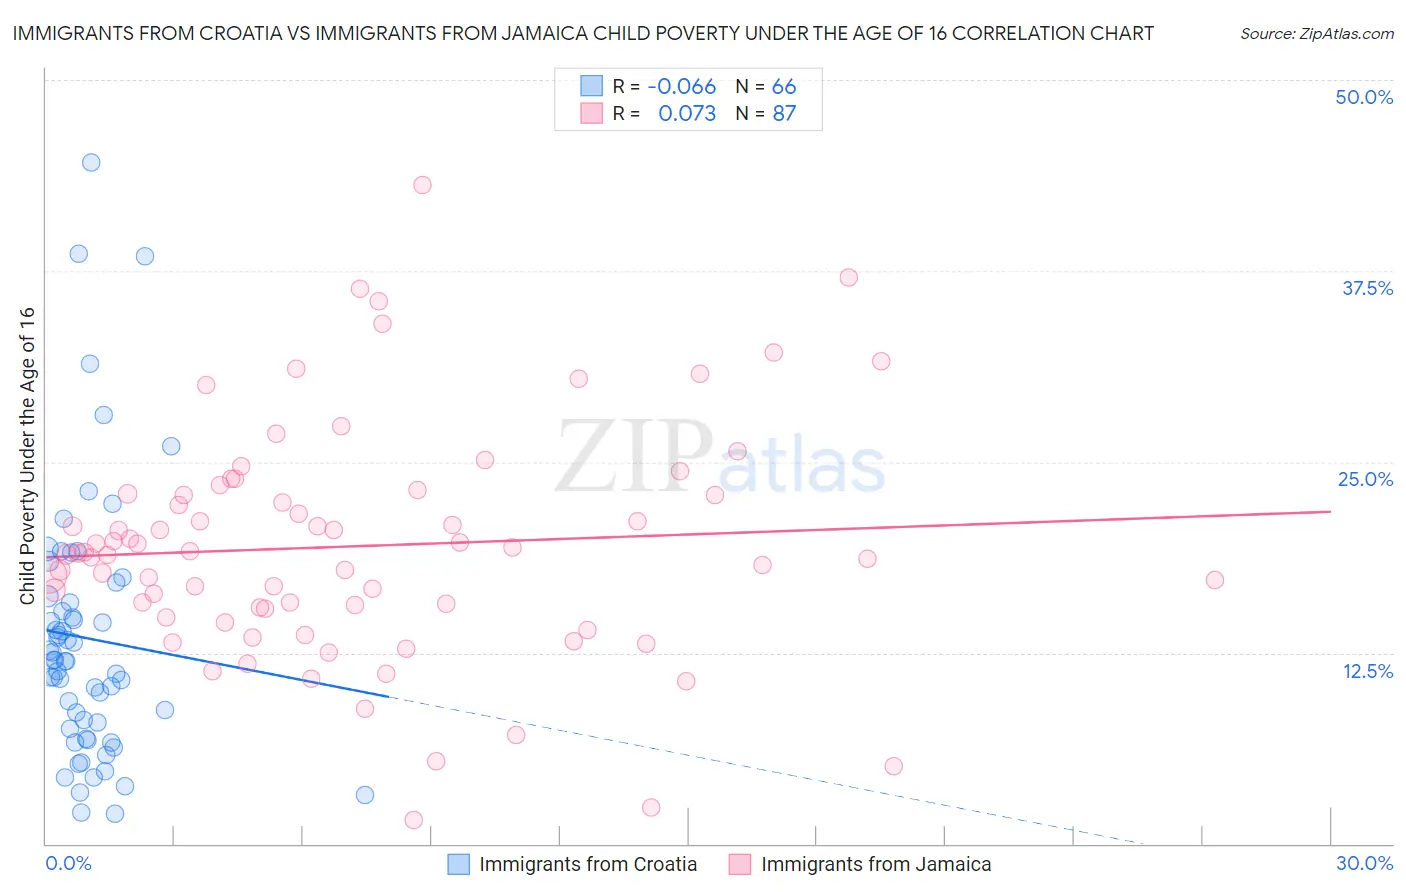 Immigrants from Croatia vs Immigrants from Jamaica Child Poverty Under the Age of 16